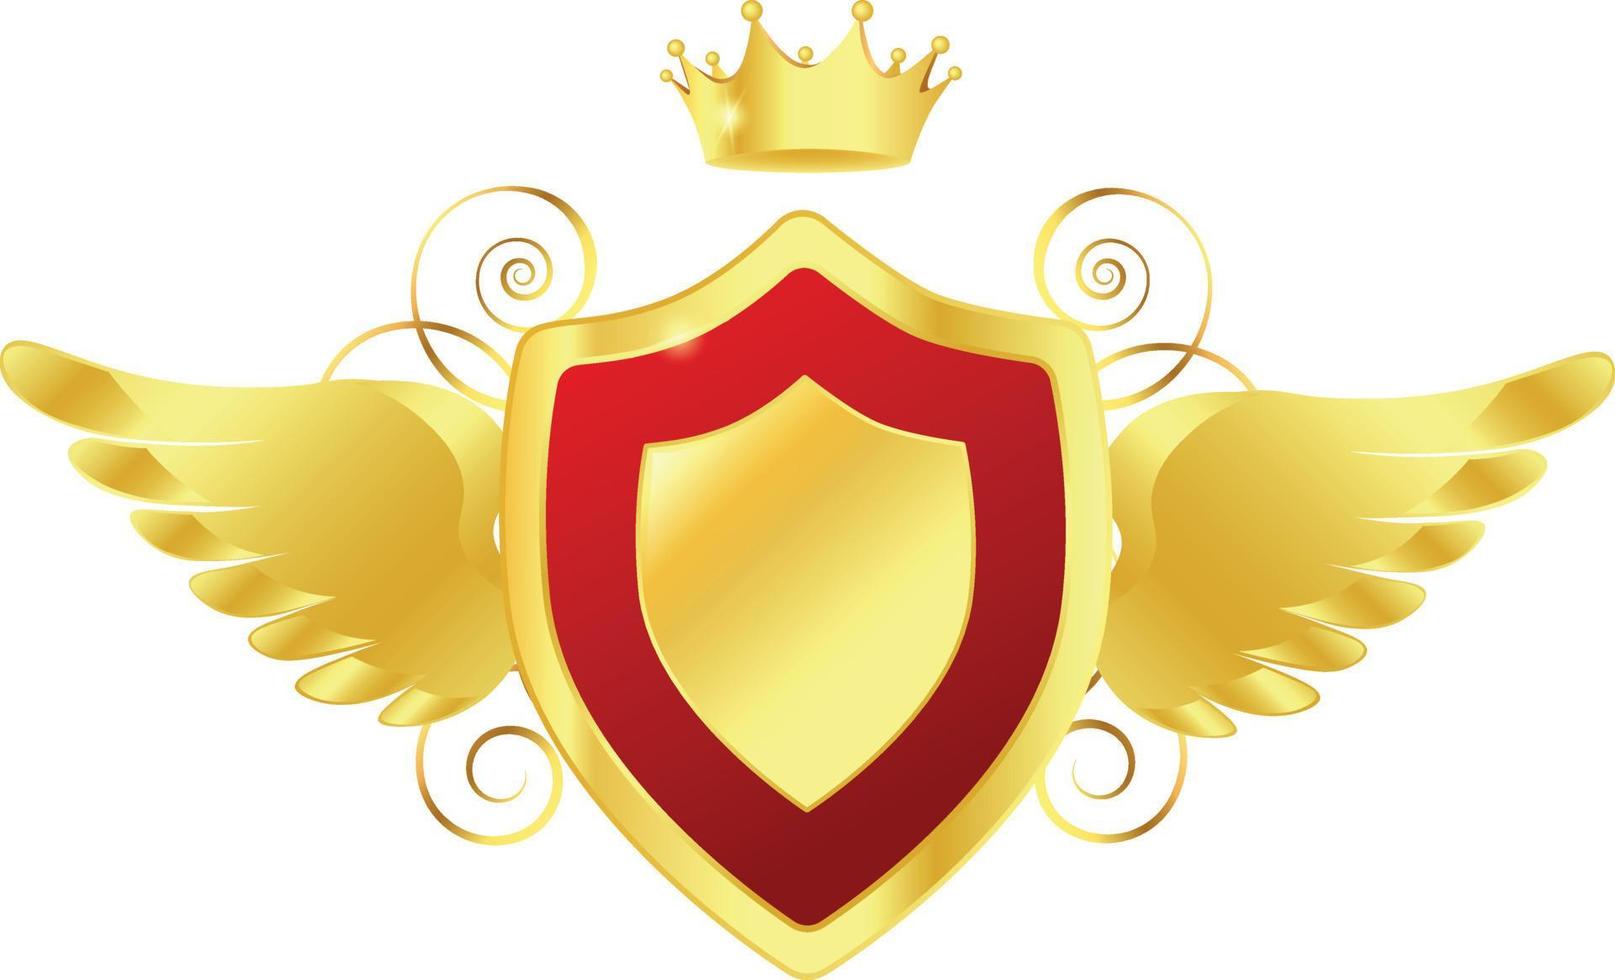 Decorative Ornate Golden Shield with Wings and Crown vector